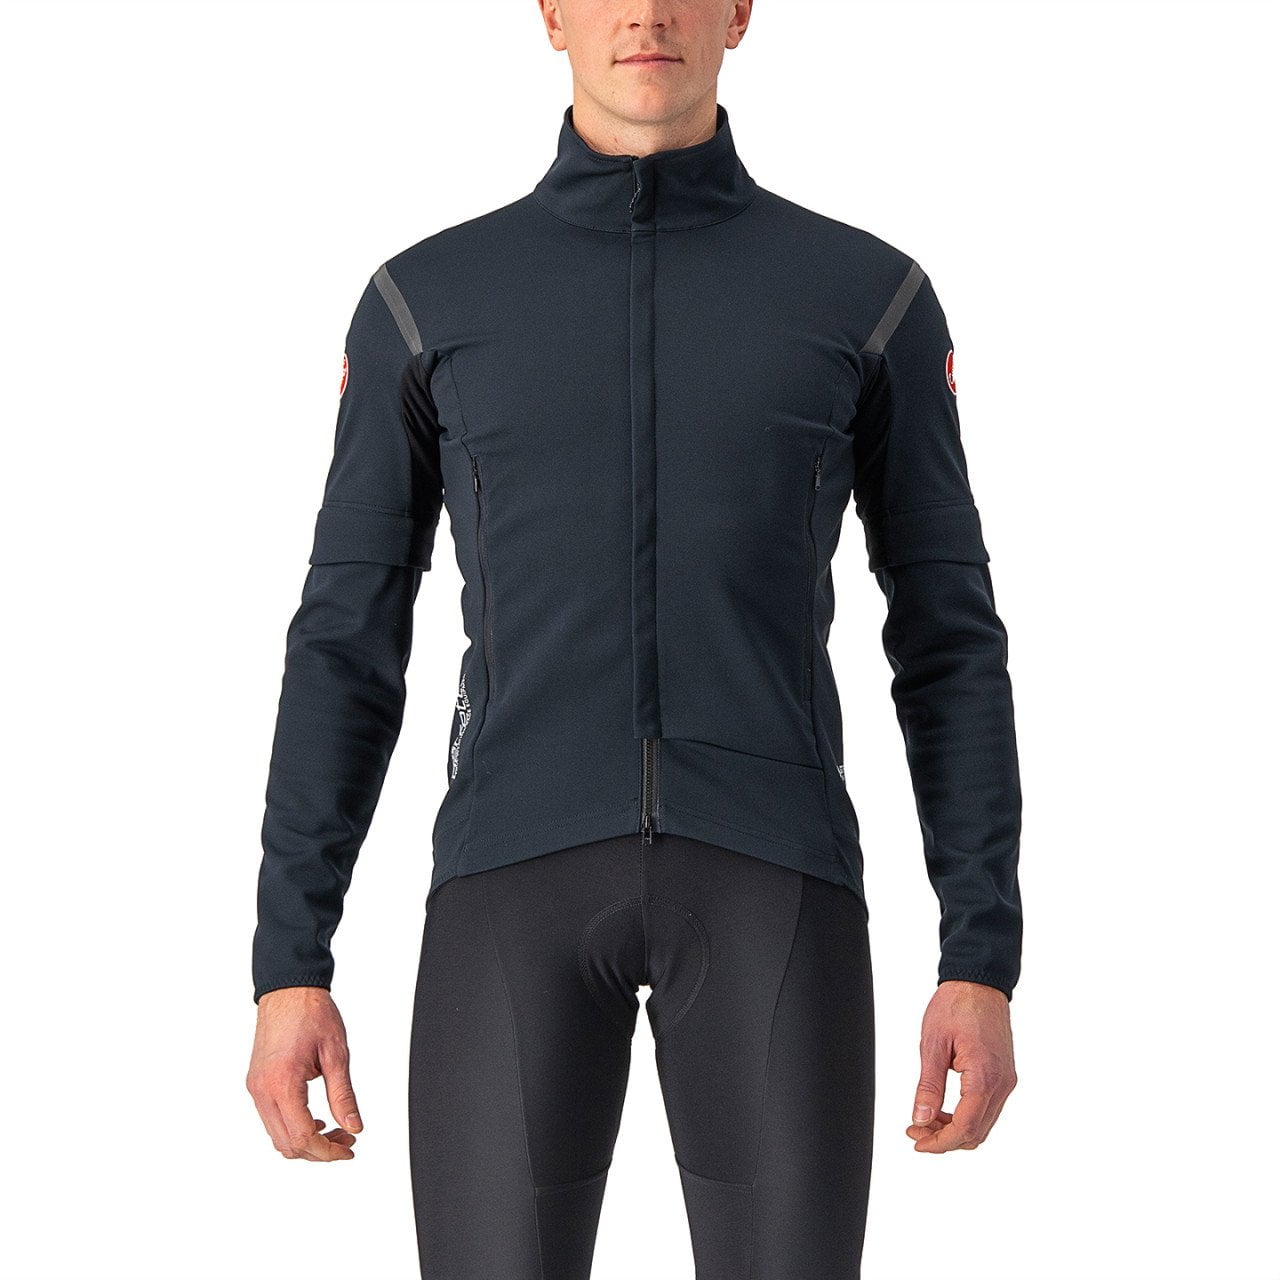 Perfetto RoS 2 Convertible Light Jacket